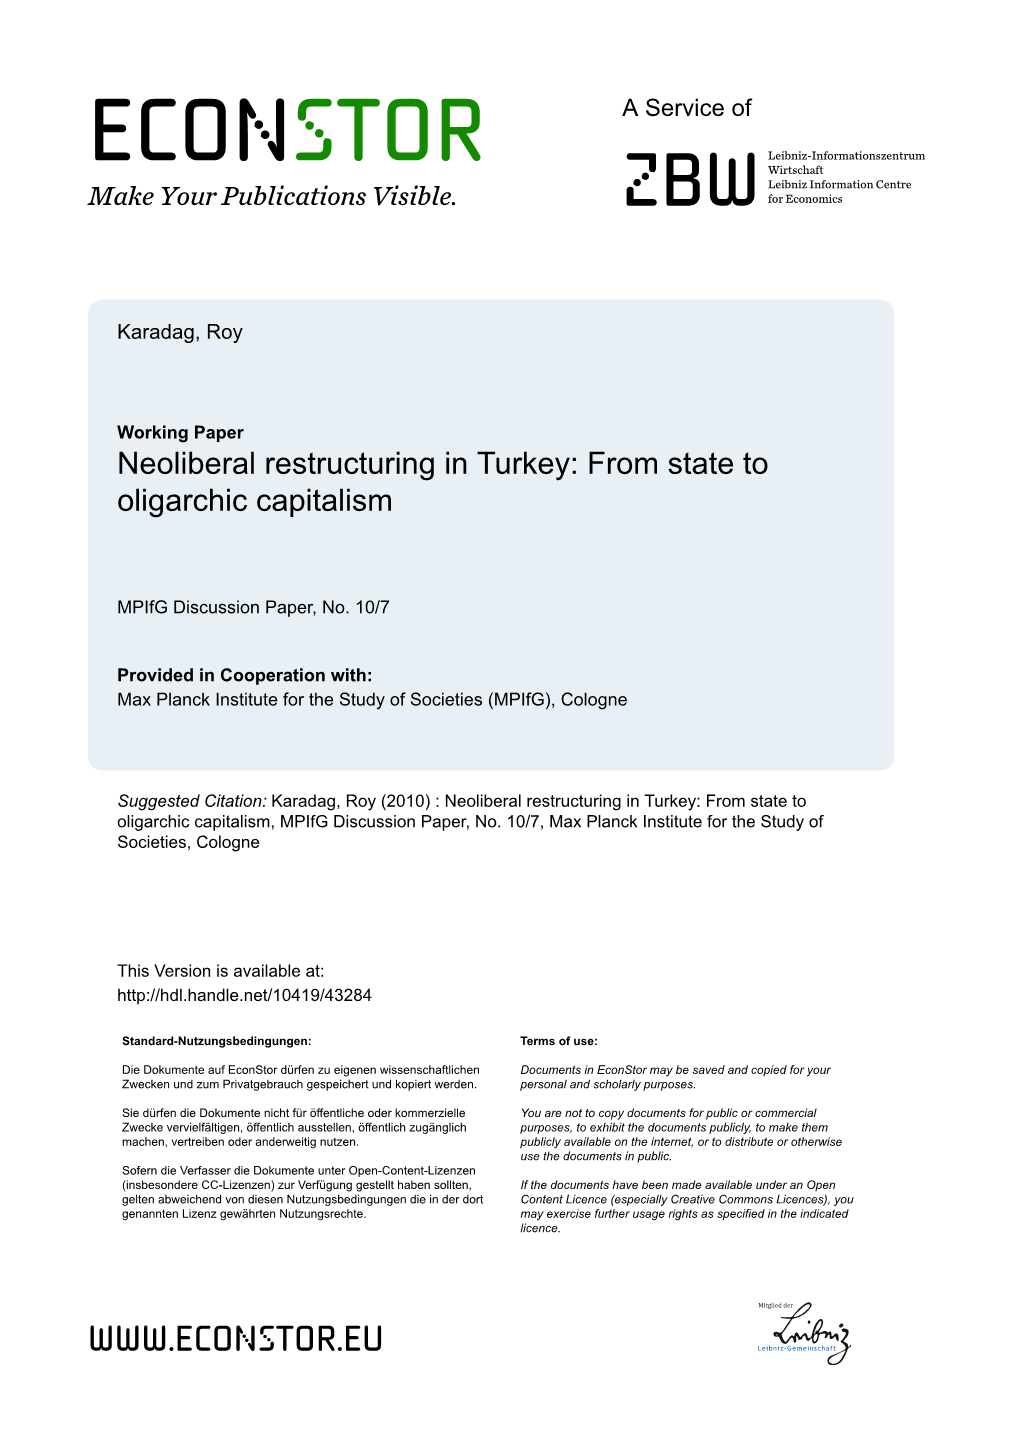 Neoliberal Restructuring in Turkey: from State to Oligarchic Capitalism